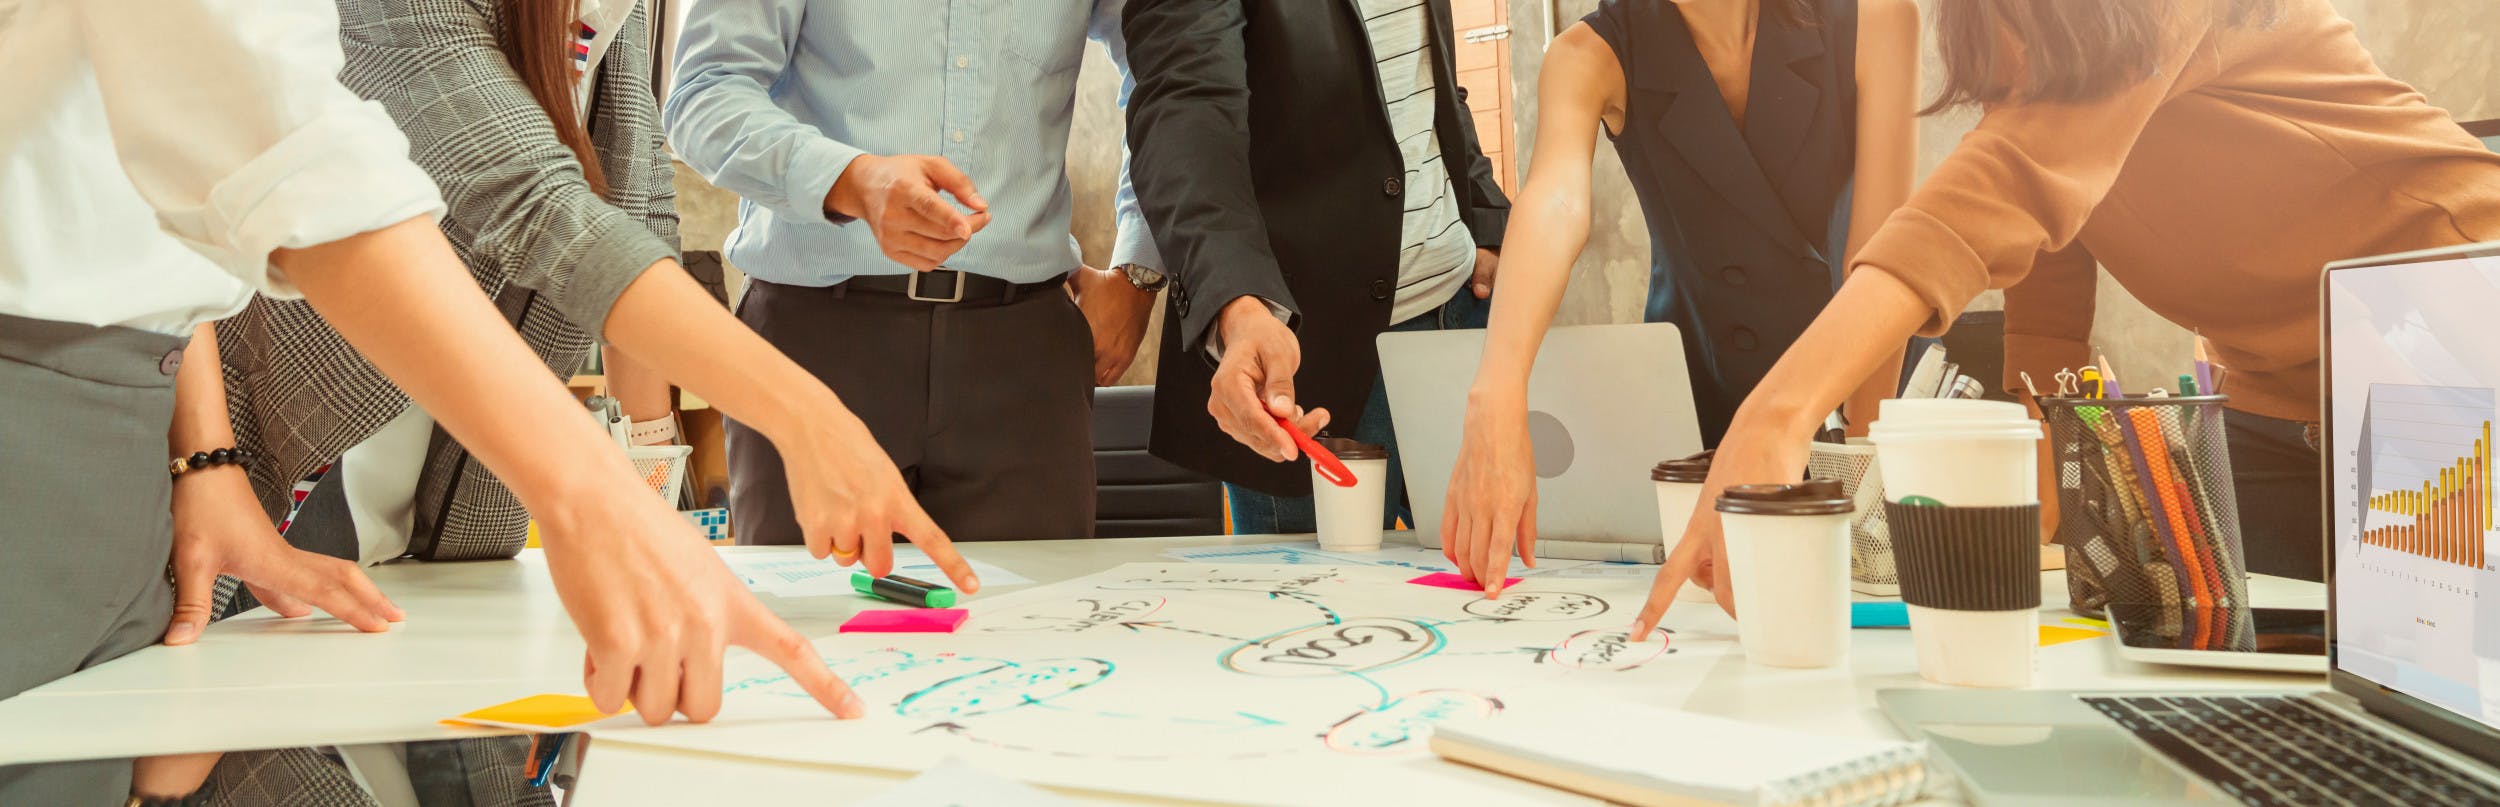 Why Allowing For Creativity Among Your Team Leads to Success